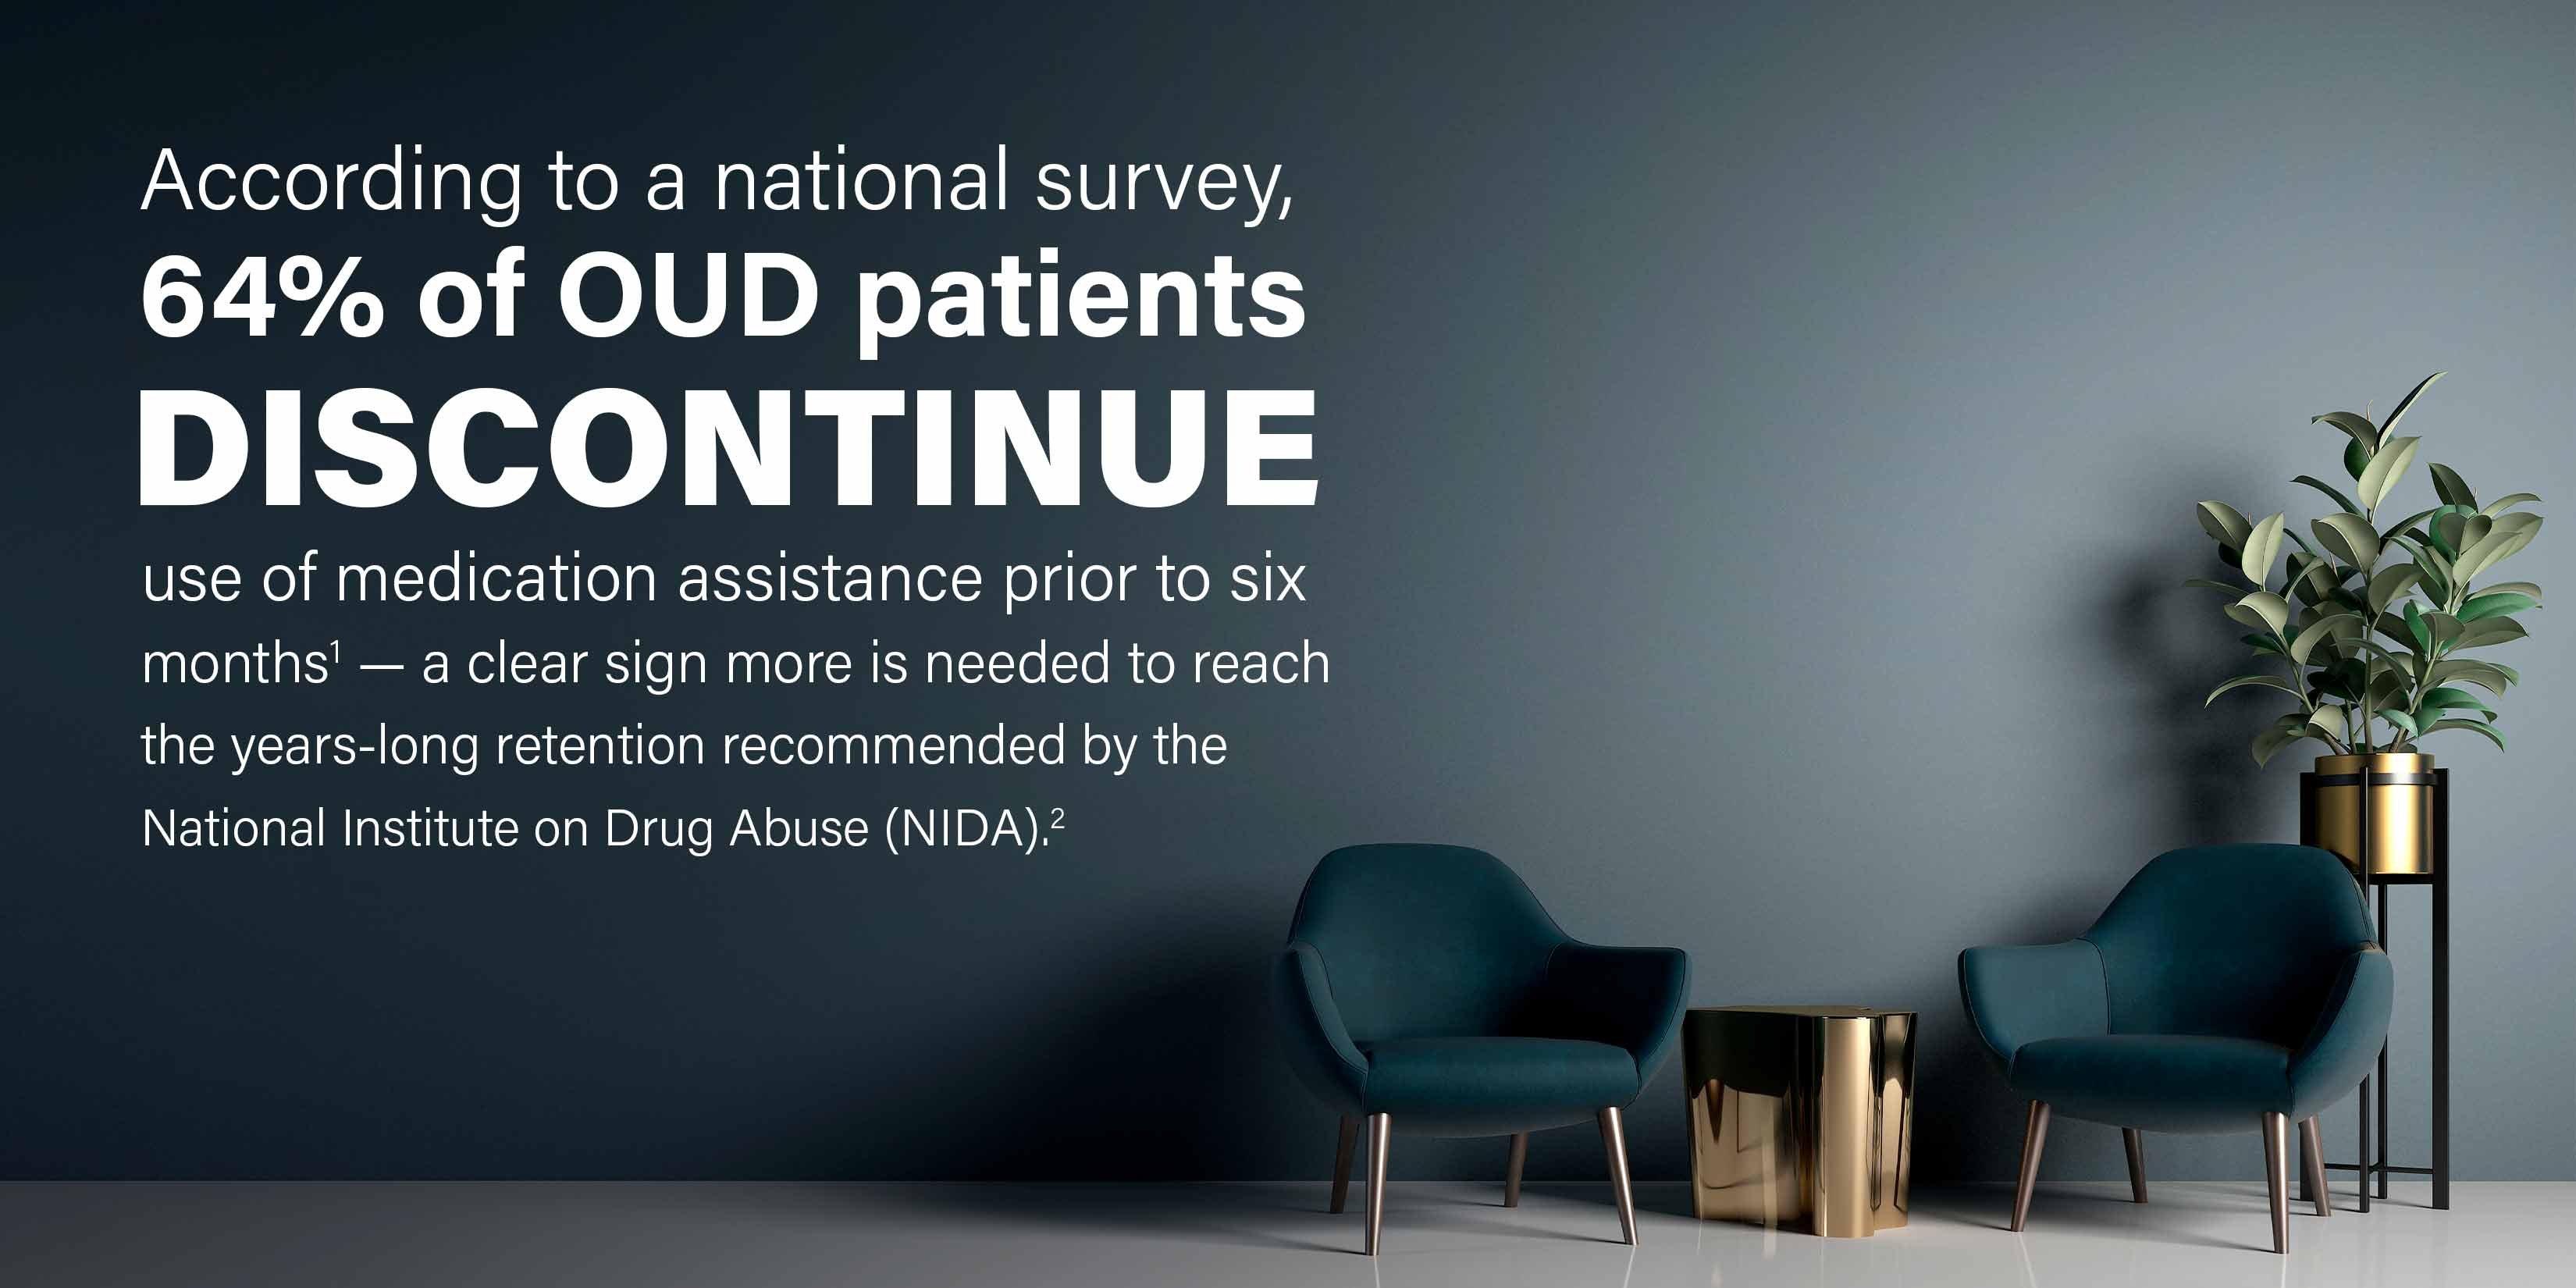 According to a national survey, 64% of OUD patients discontinue use of medication assistance prior to six months[1] — a clear sign more is needed to reach the years-long retention recommended by the National Institute on Drug Abuse (NIDA).[2]